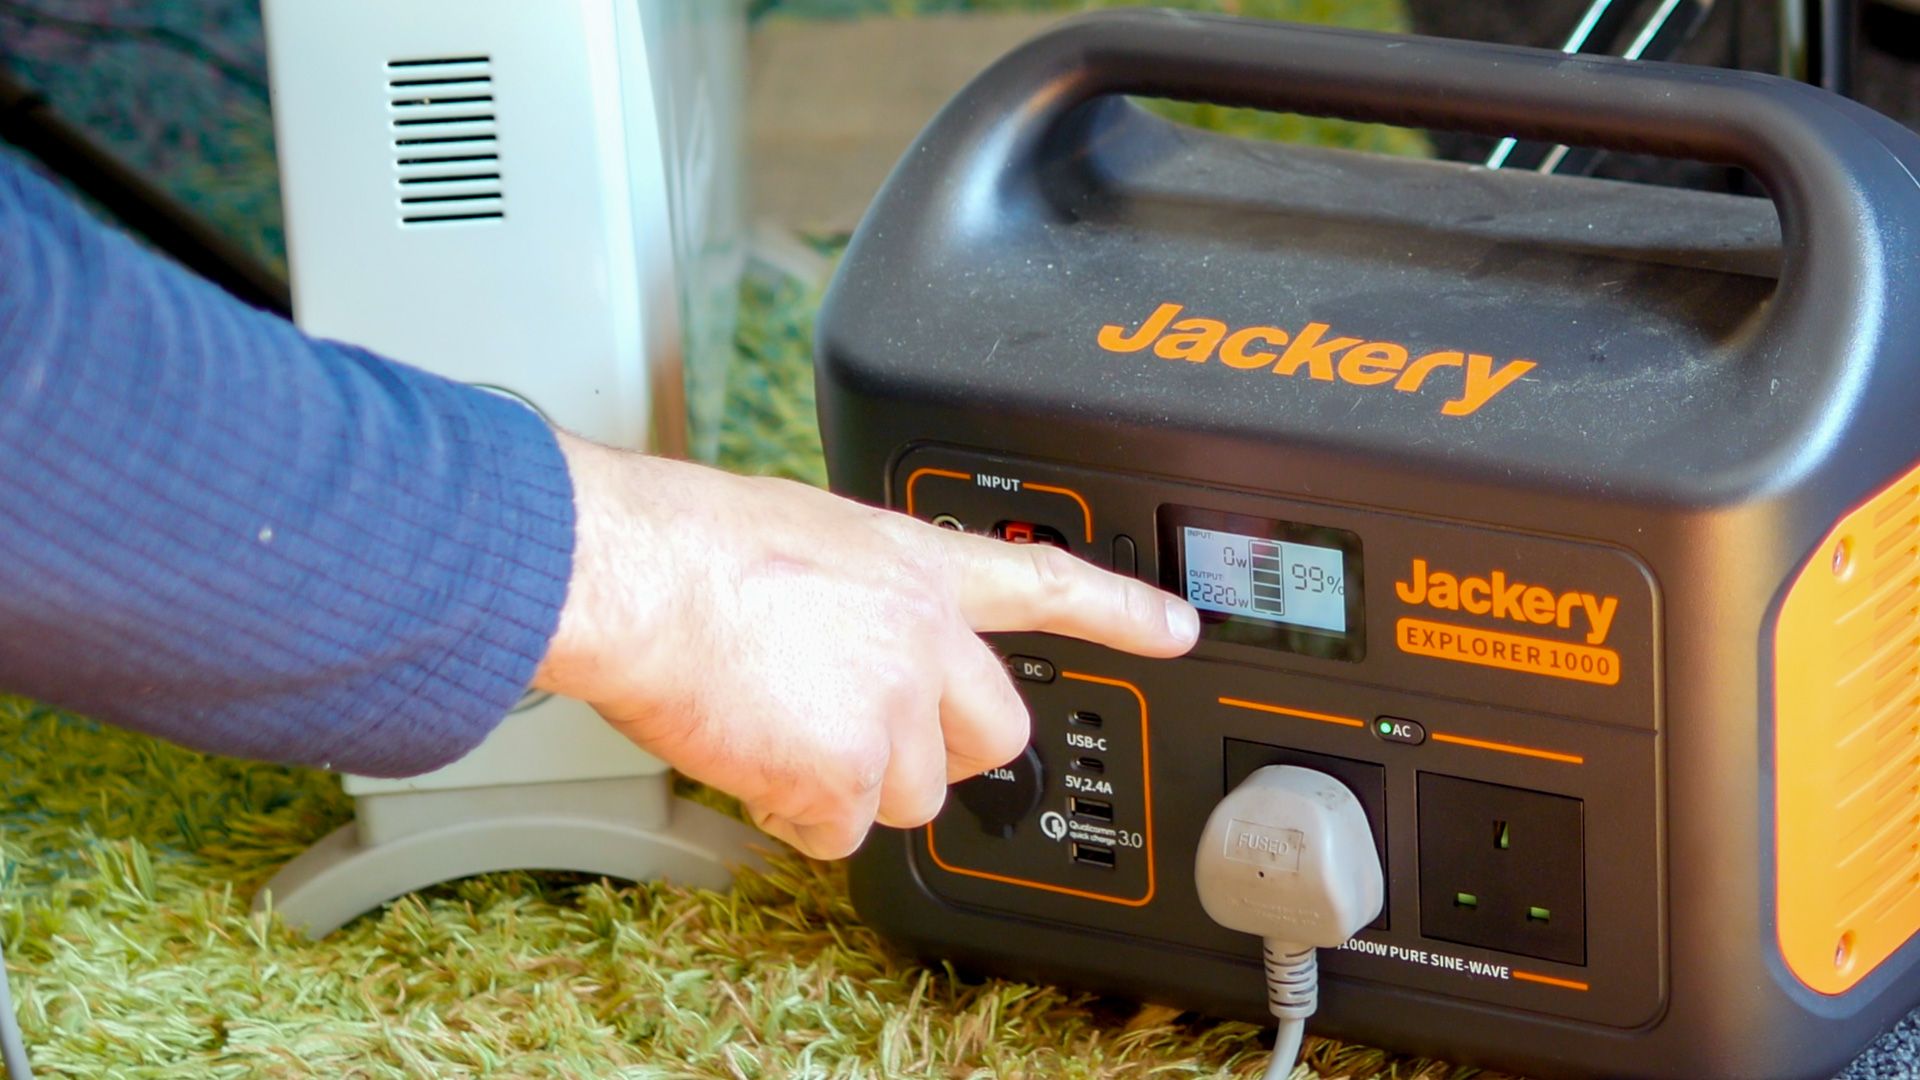 testing the overdischarge protection on the jackery expolorer 1000